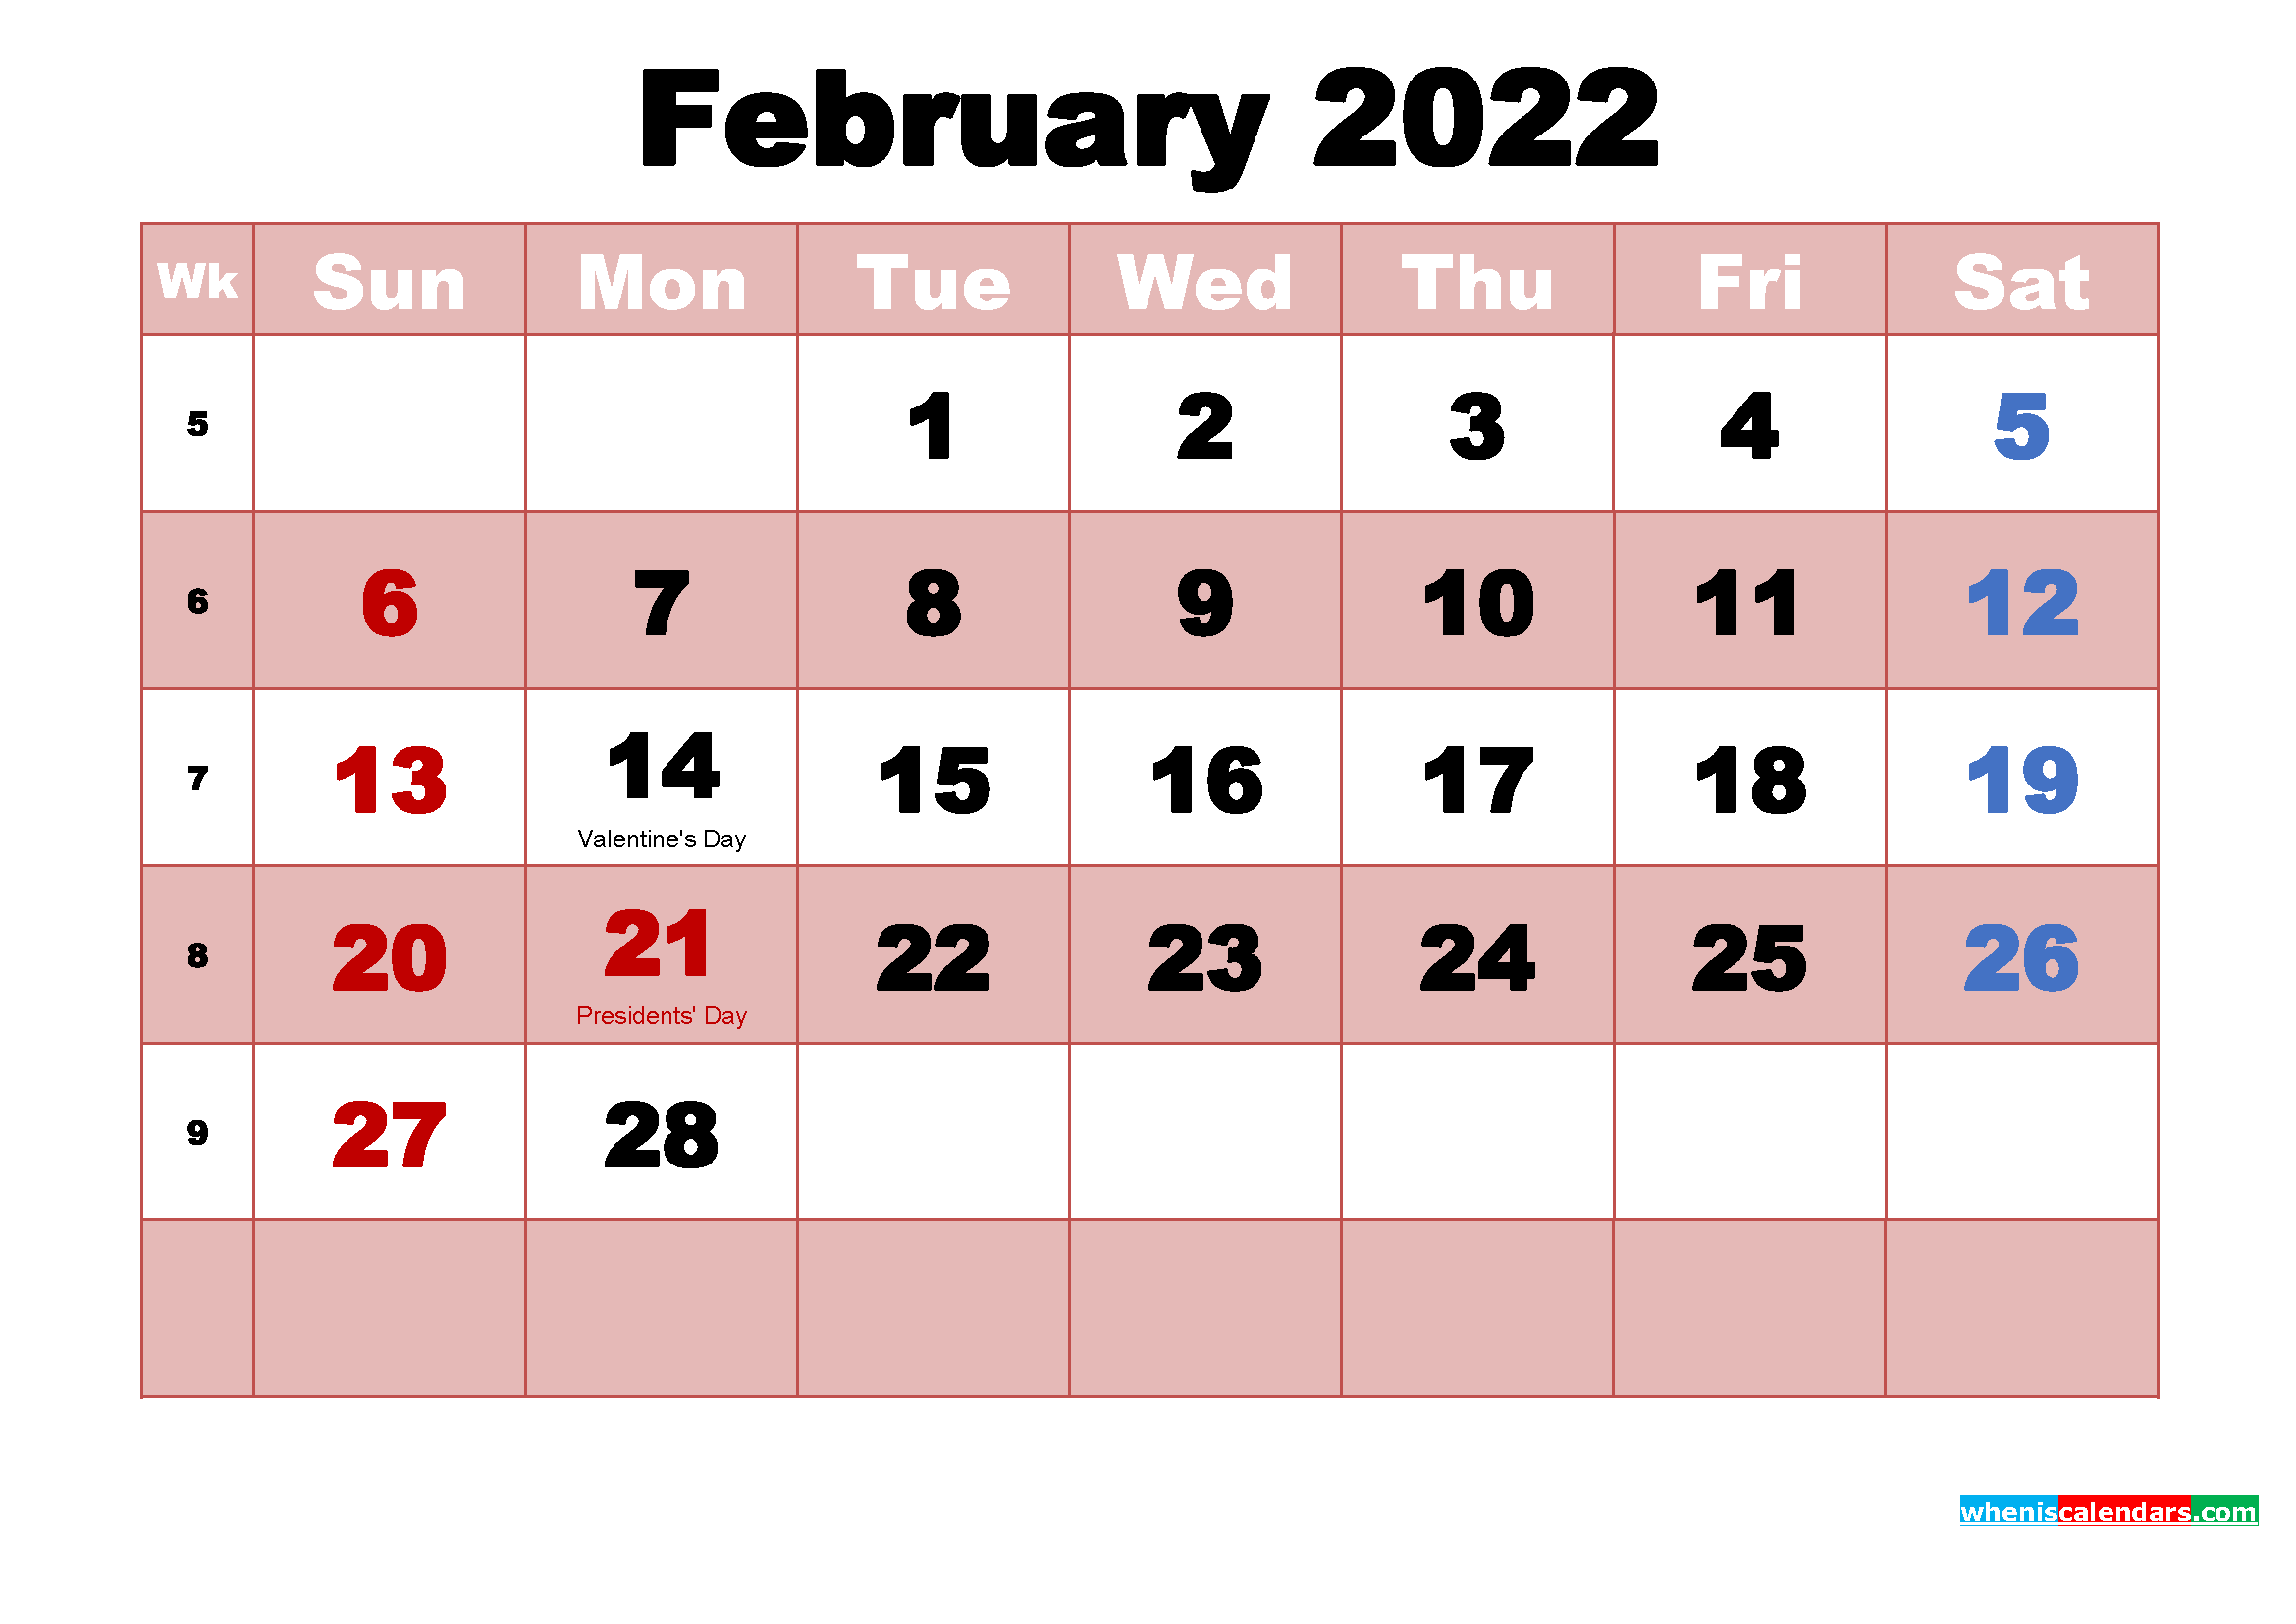 February 2022 Printable Monthly Calendar with Holidays